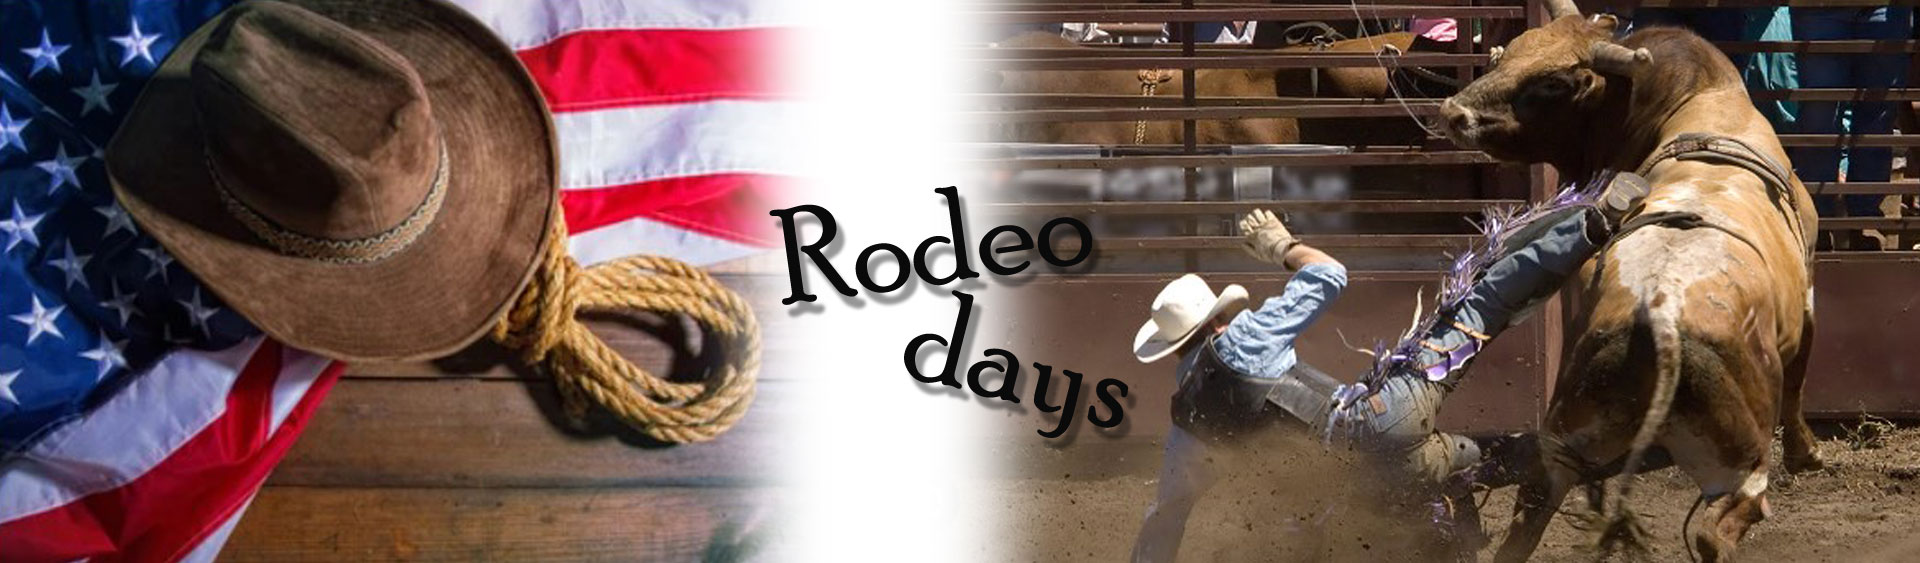 RODEO DAY